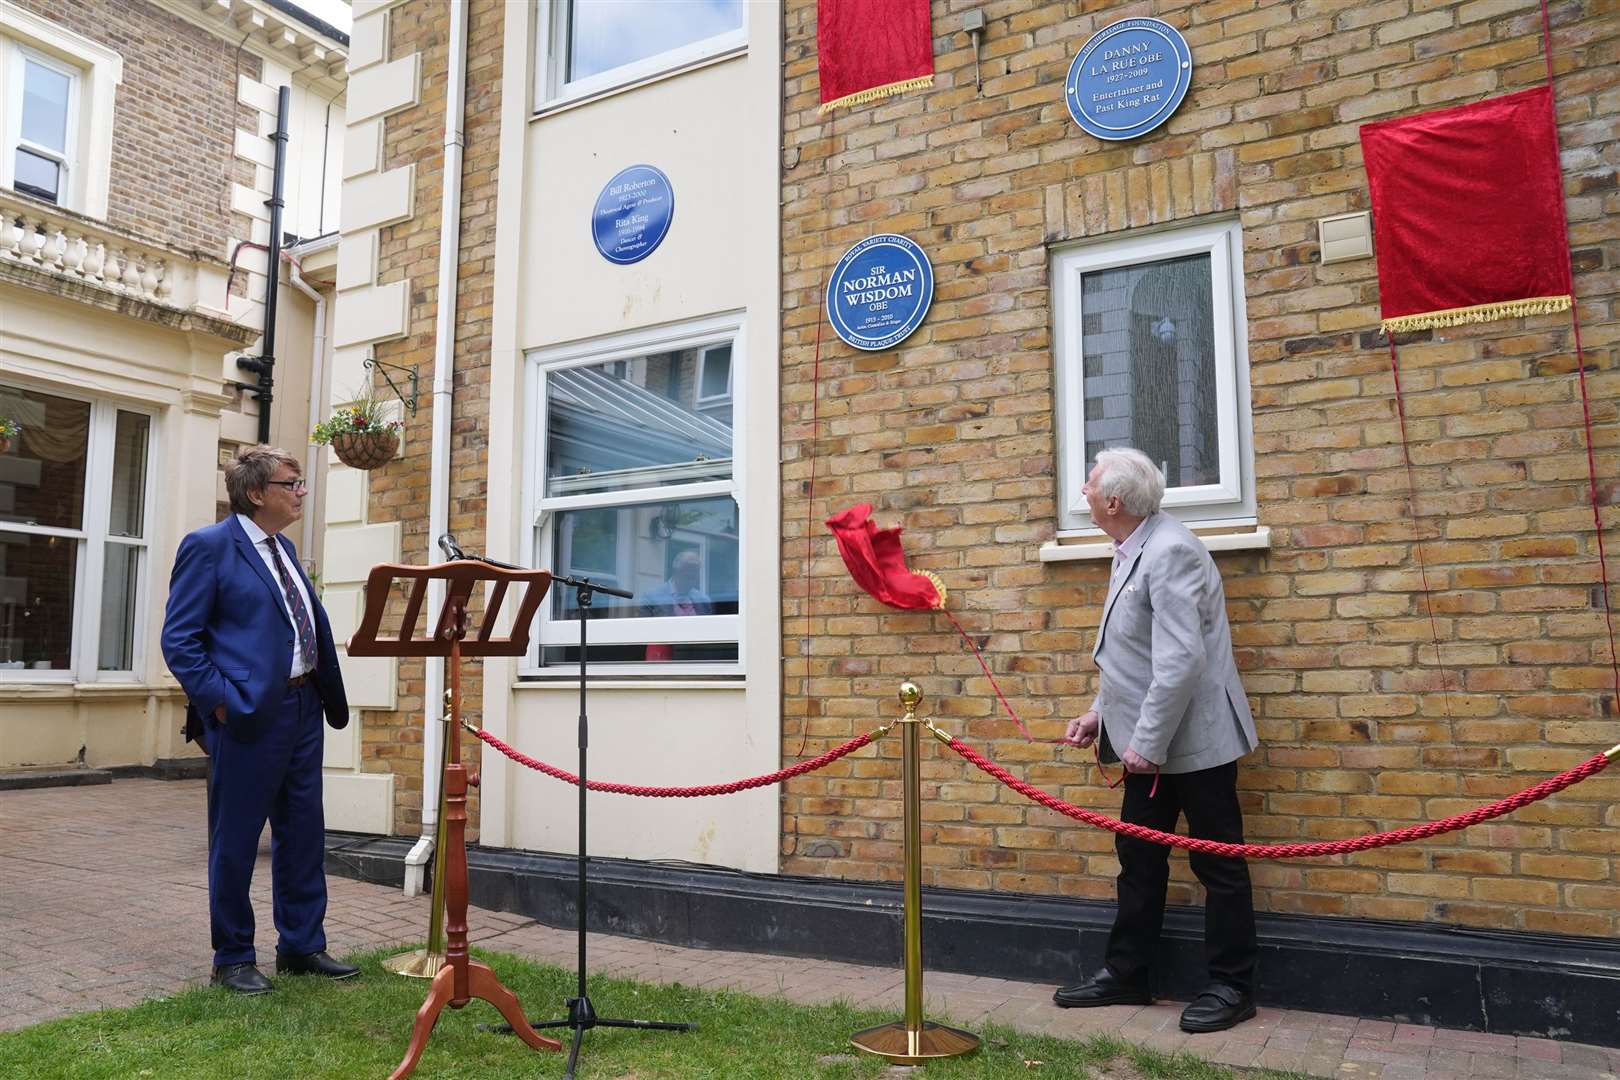 DJ Mike Read watches as Johnny Mans, who represented Sir Norman Wisdom, unveils a Blue Plaque in his name during a multi-plaque unveiling ceremony (Lucy North/PA)